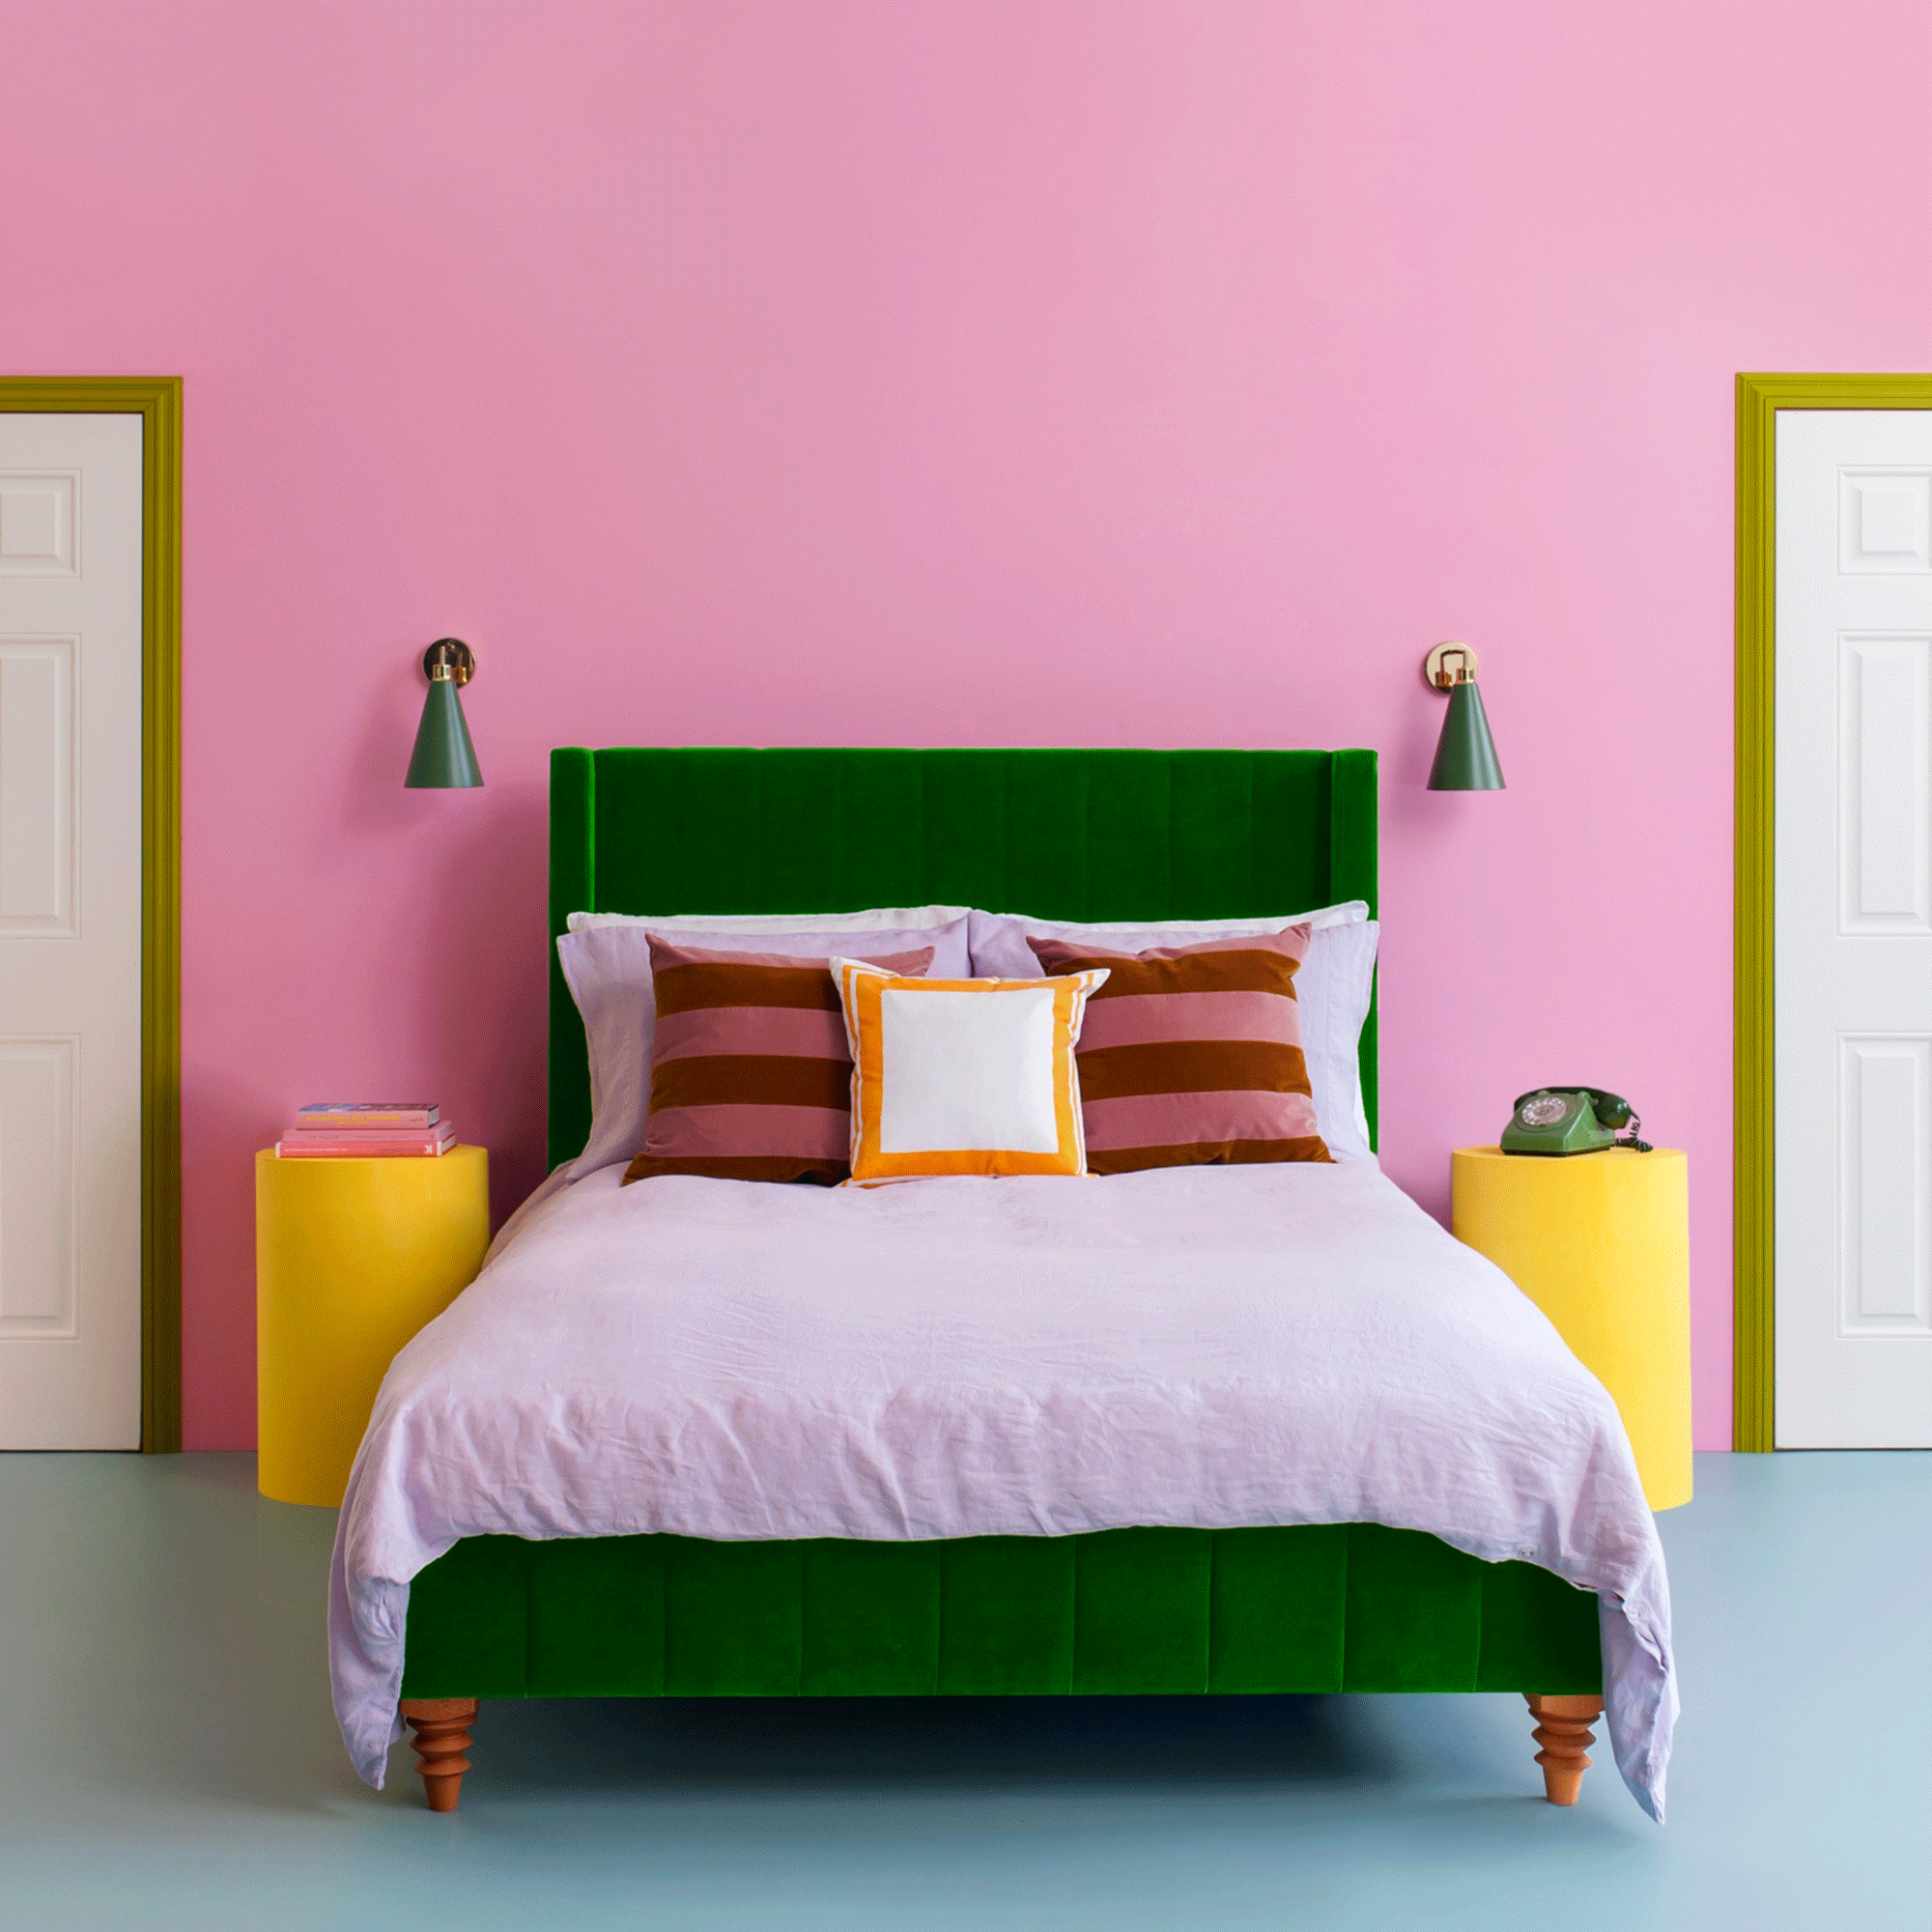 Pink bedroom with green bed